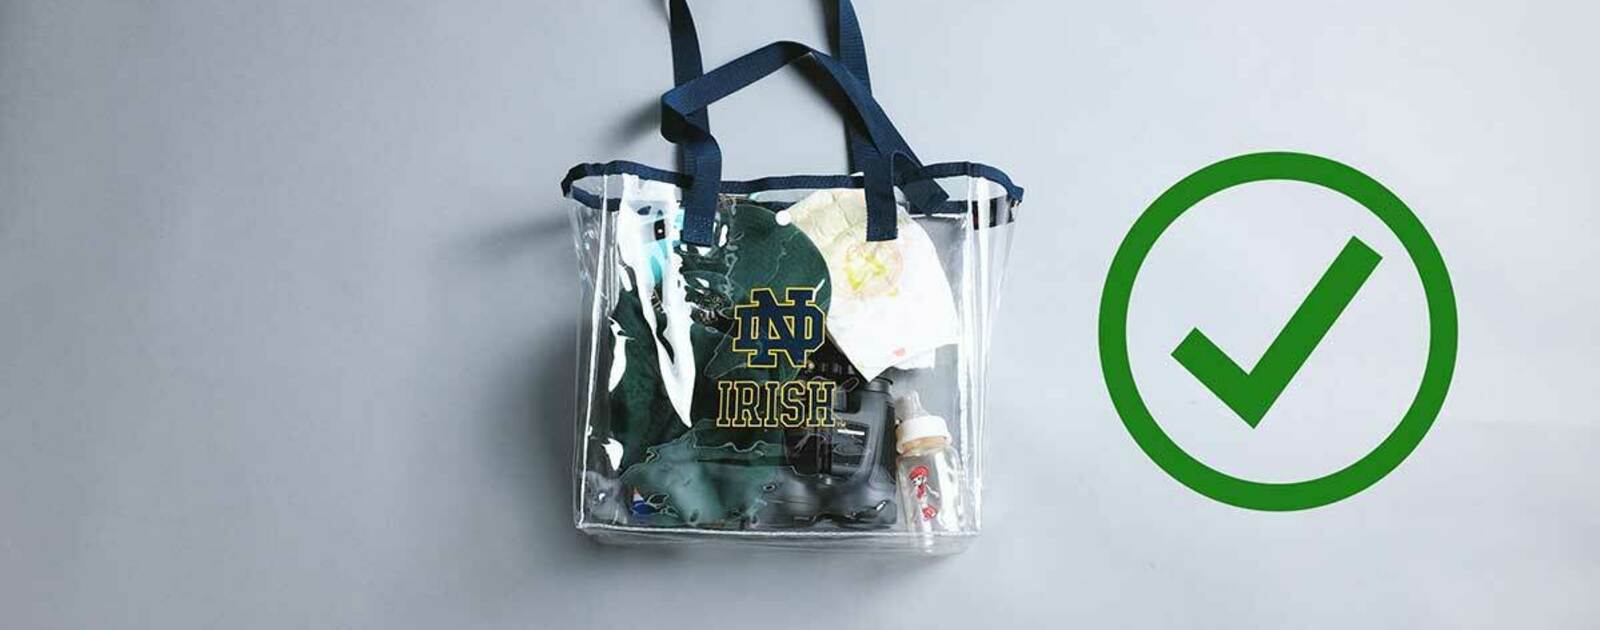 Notre Dame to implement clear bag policy for reserve-ticketed events, News, Notre Dame News